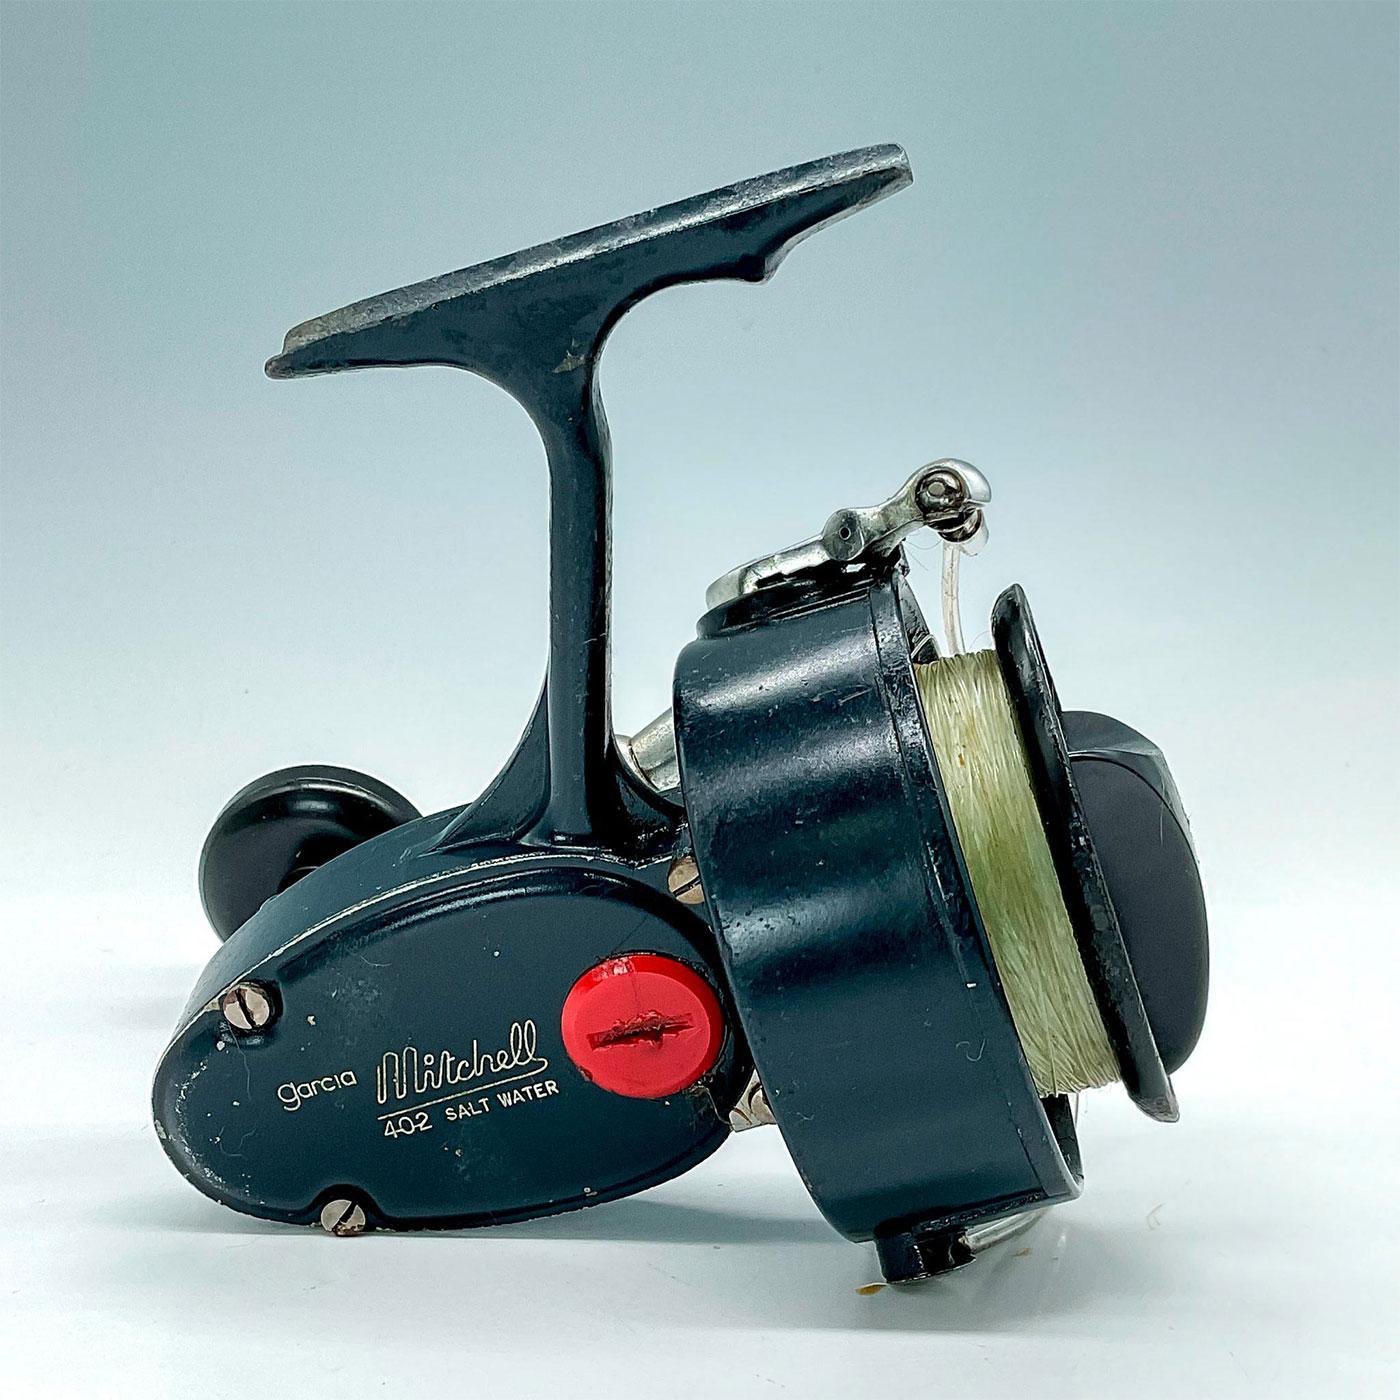 MITCHELL 402 SALTWATER spinning reel good used shape $34.99 - PicClick